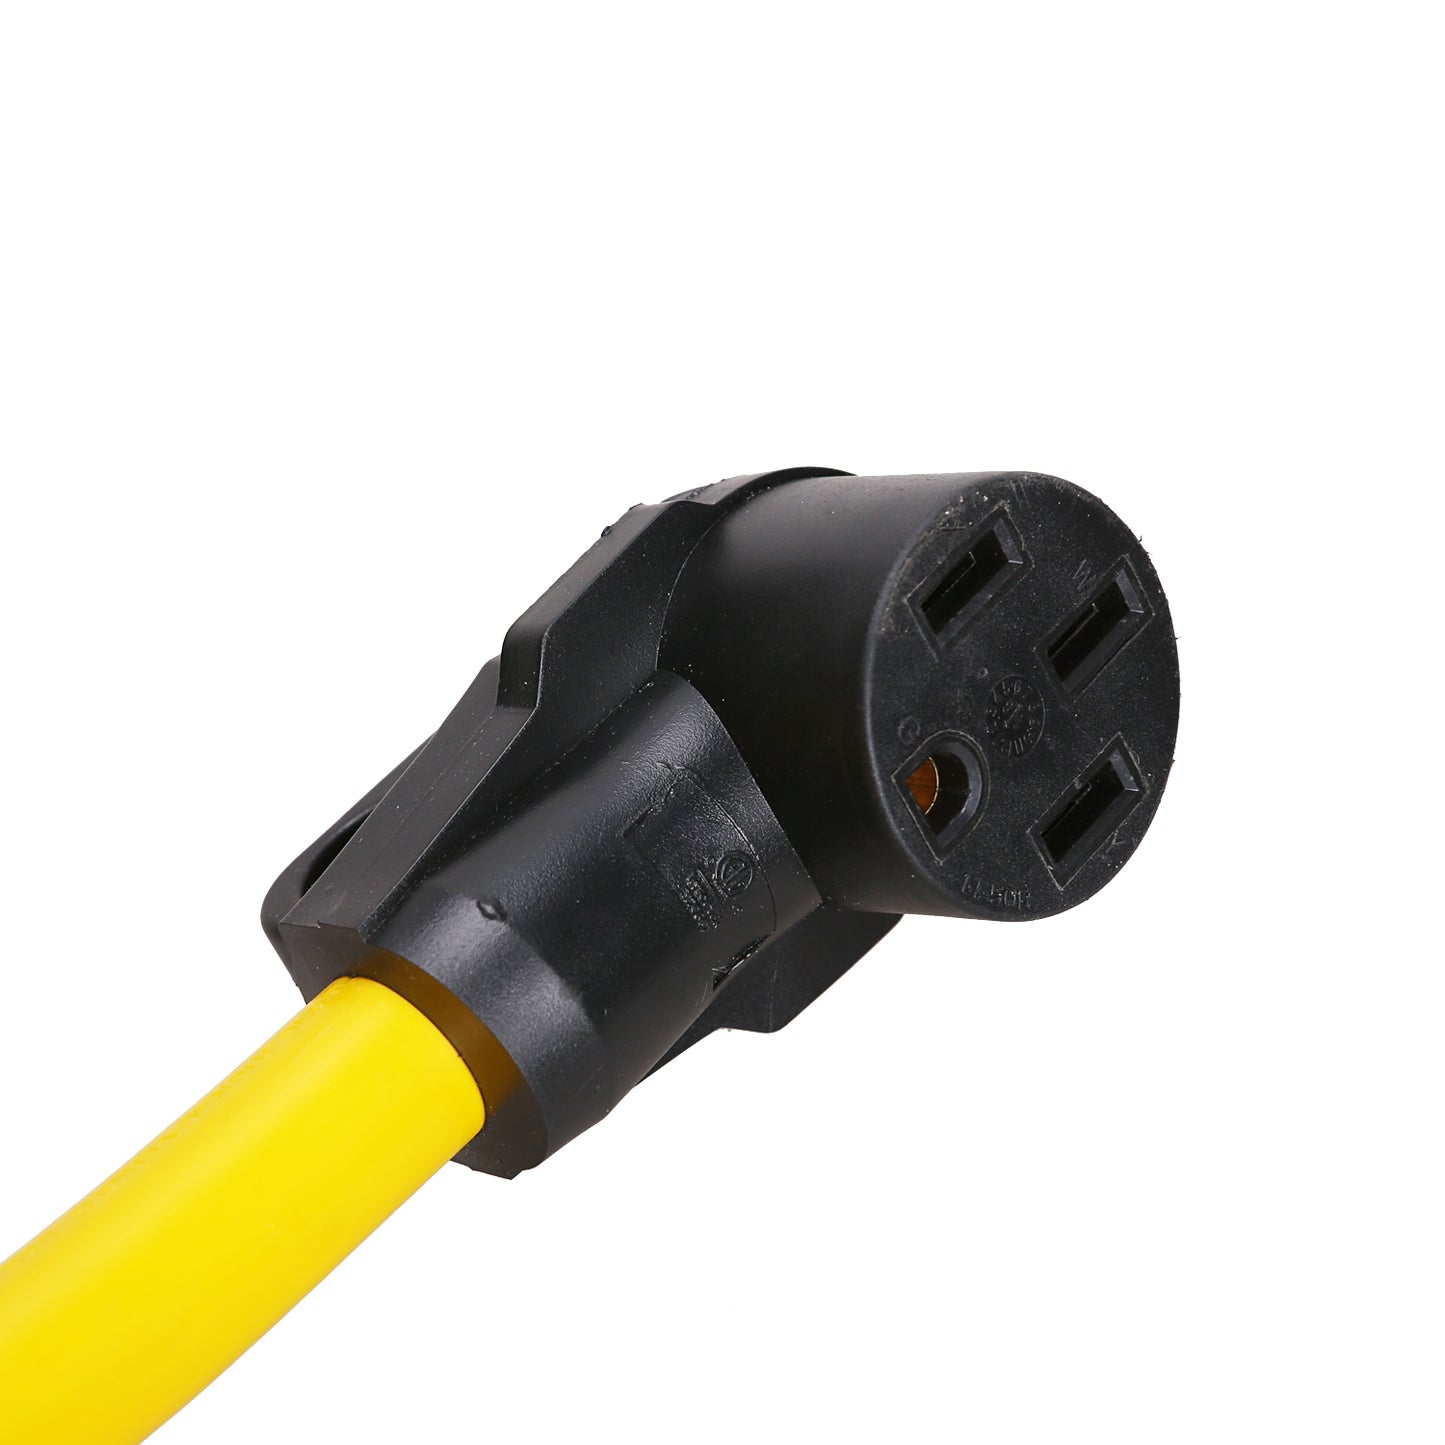 50 Amp Cable for RV female plug